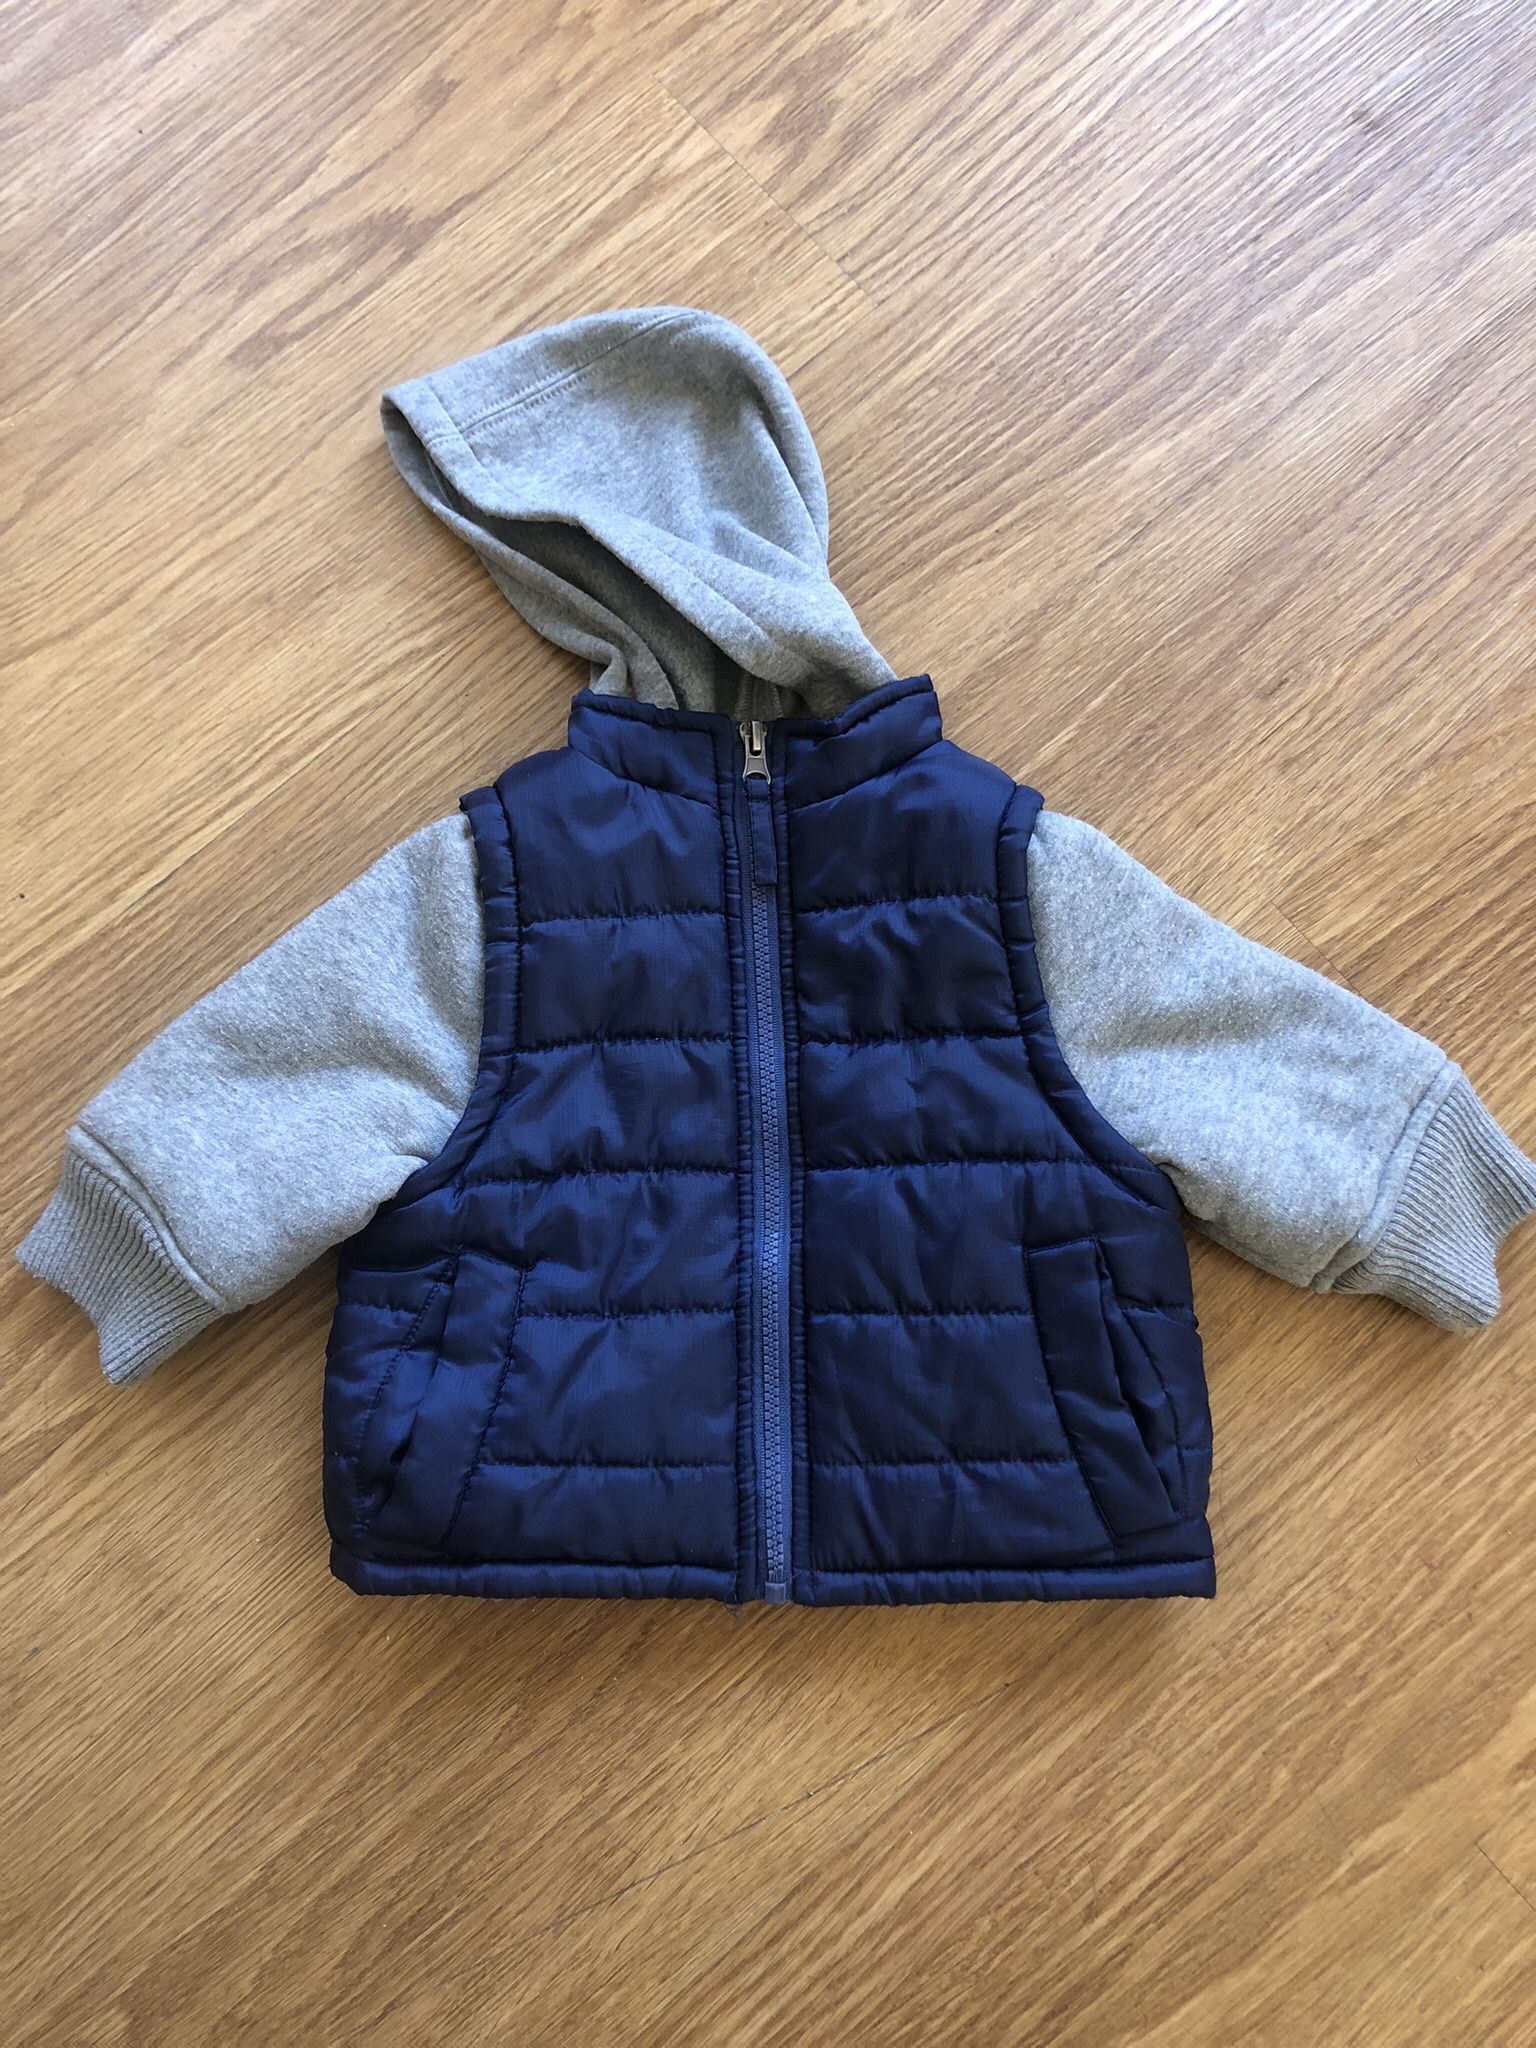 iXtreme Toddler Boys Puffer Winter Vest Hoodie Jacket Gray, Navy Blue, 12 Months